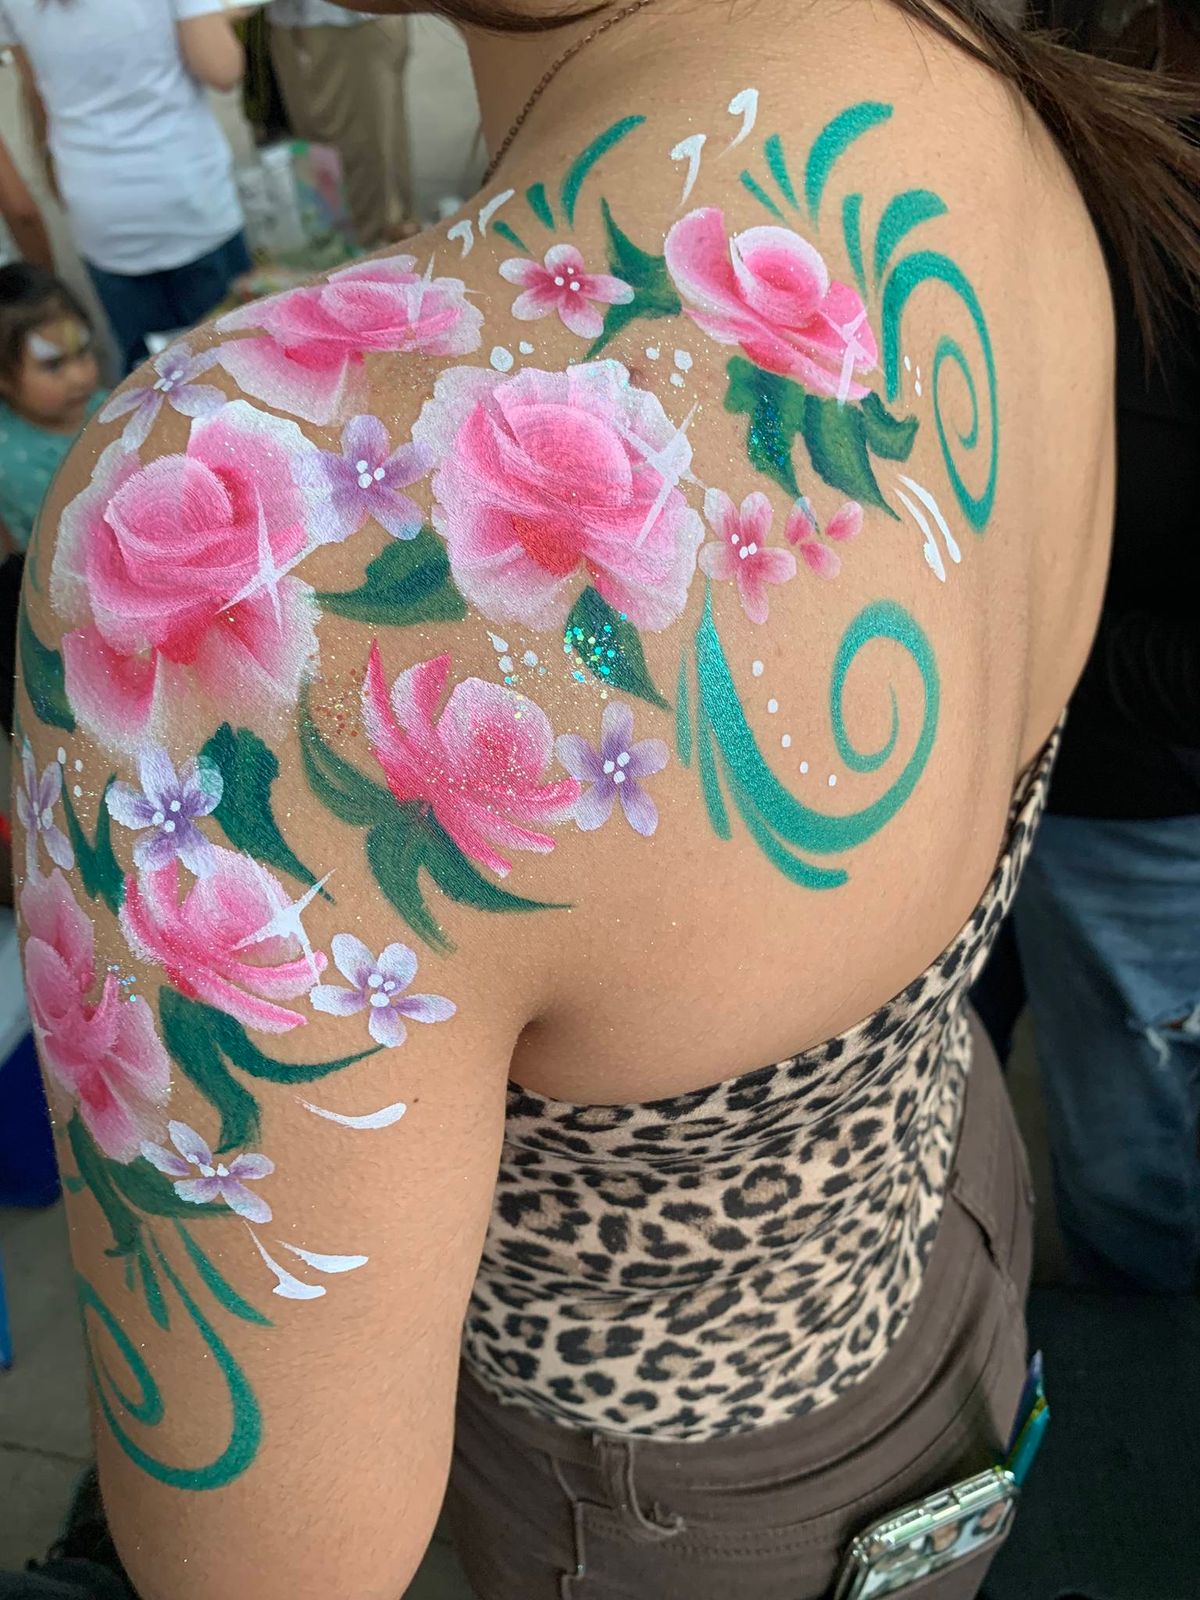 Henna and Body Art! Chile Fest